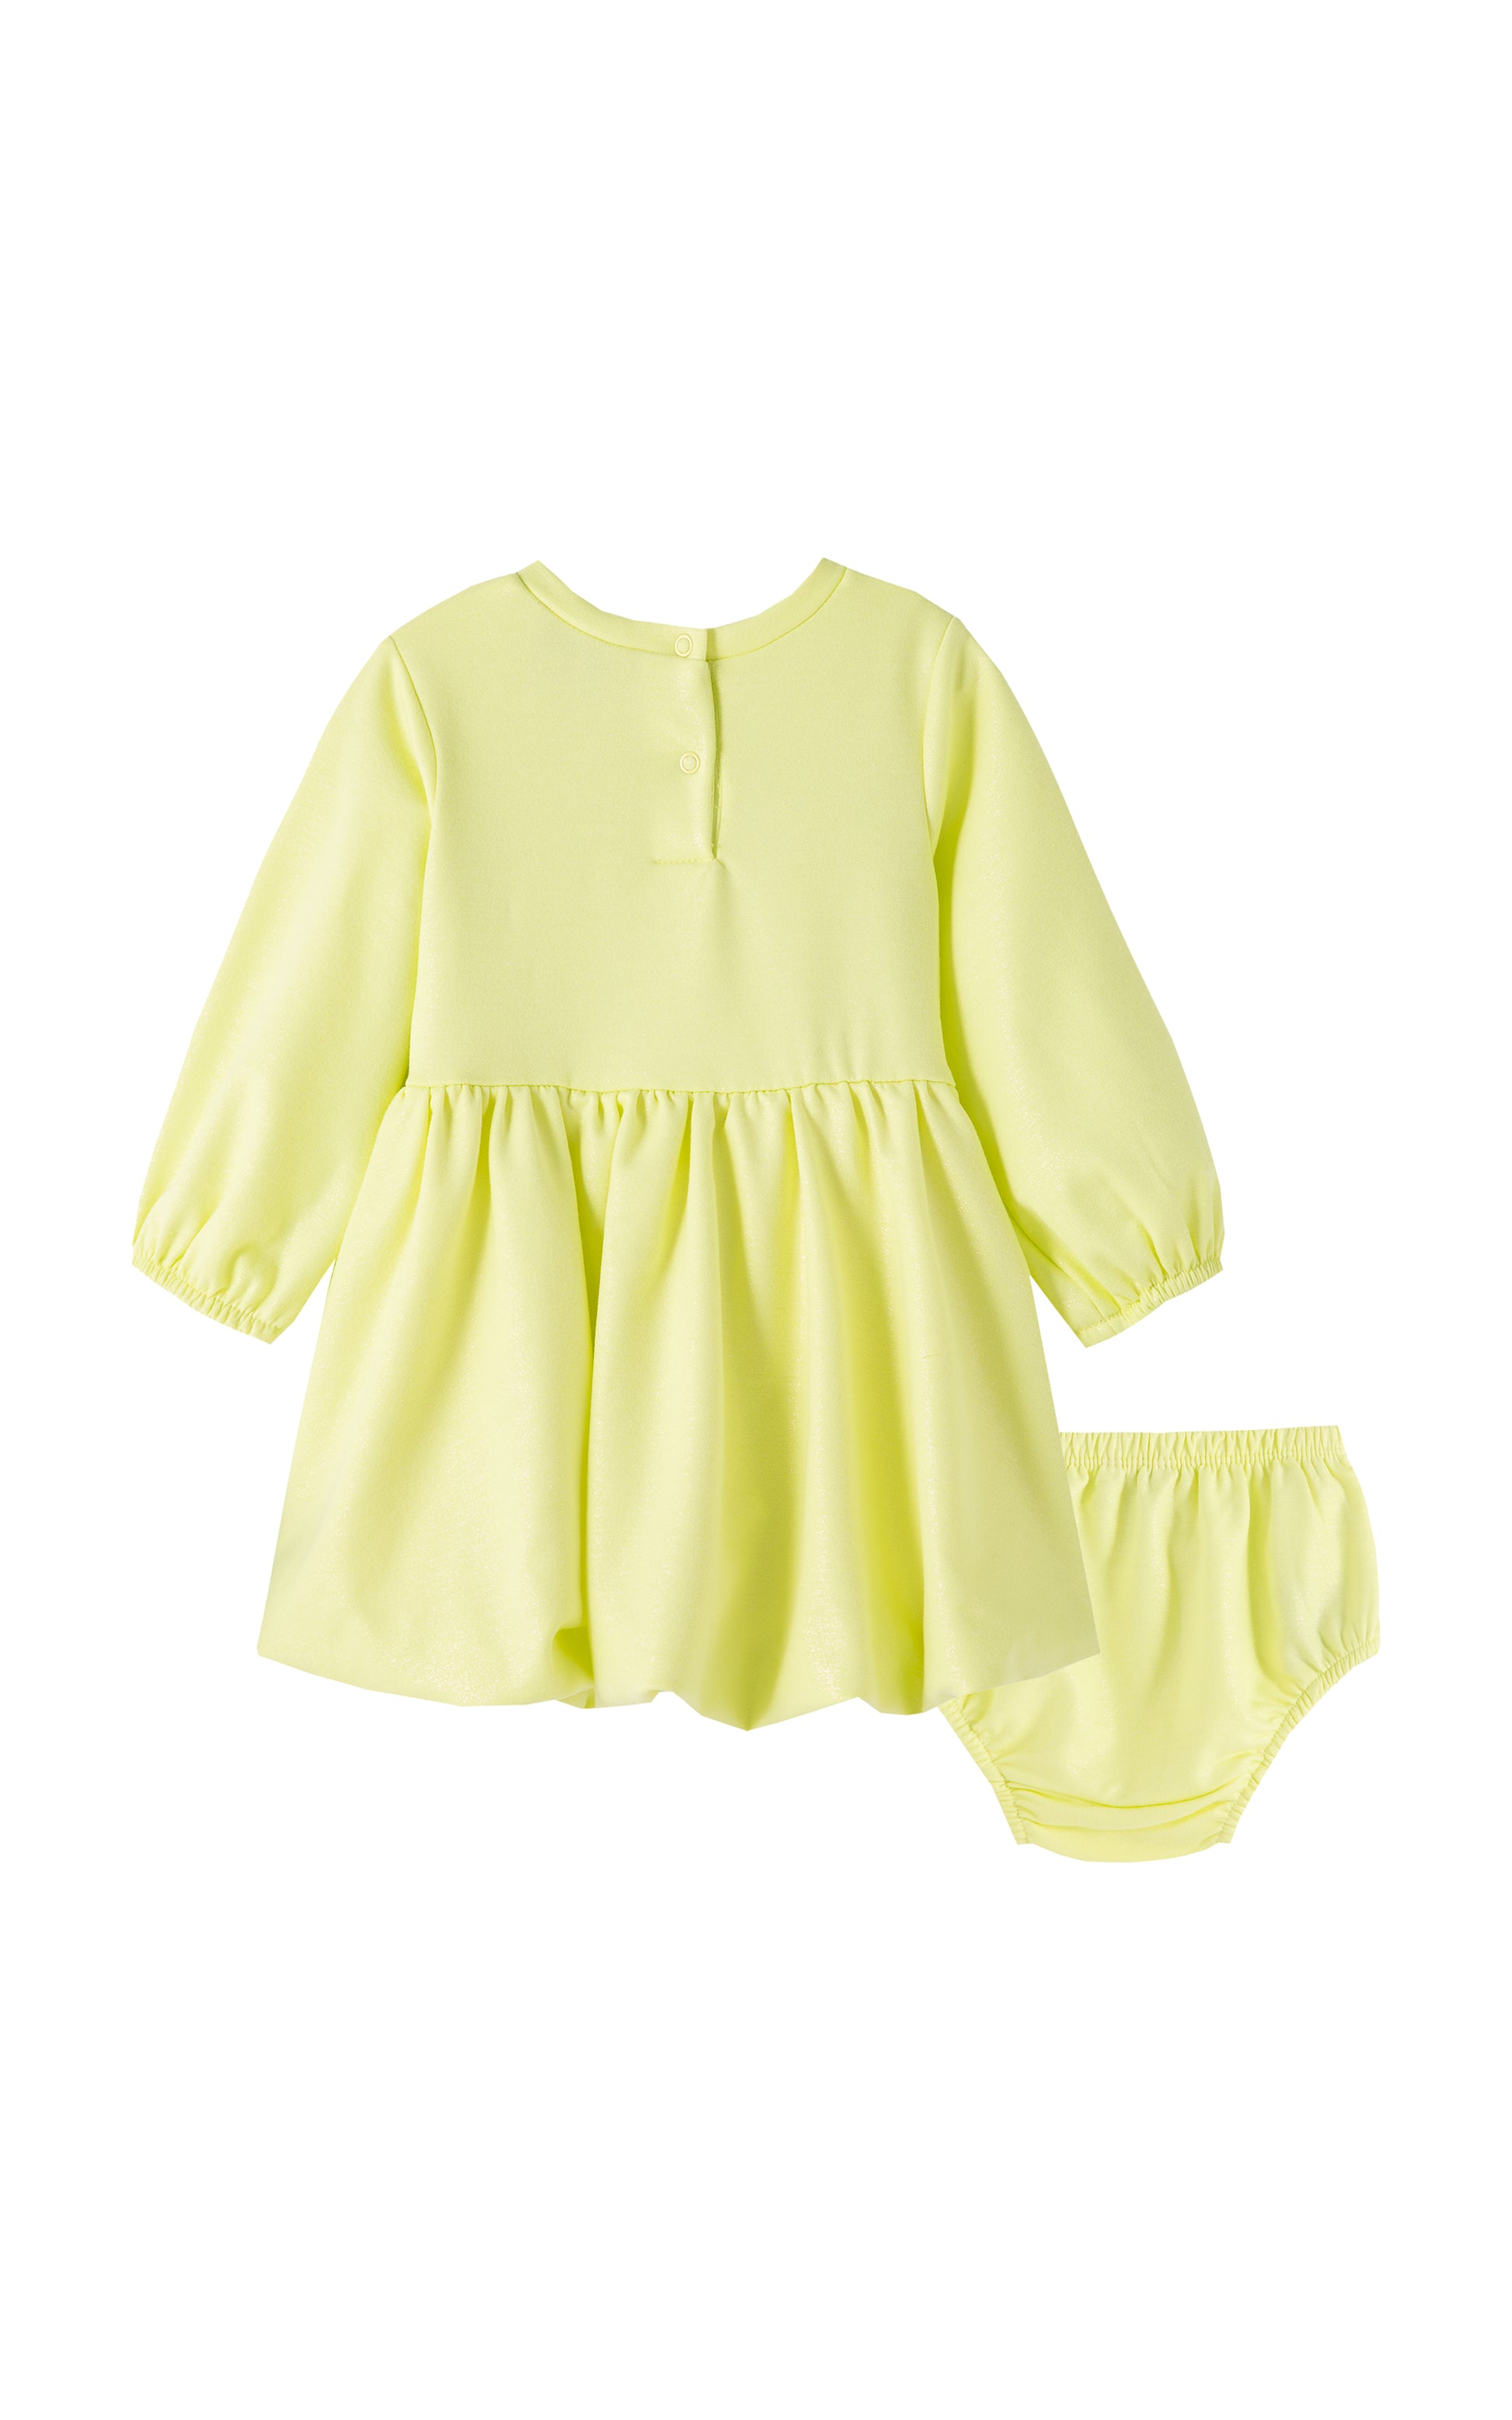 BACK OF METALLIC LIME GREEN BUBBLE DRESS WITH BOW AND MATCHING BLOOMERS